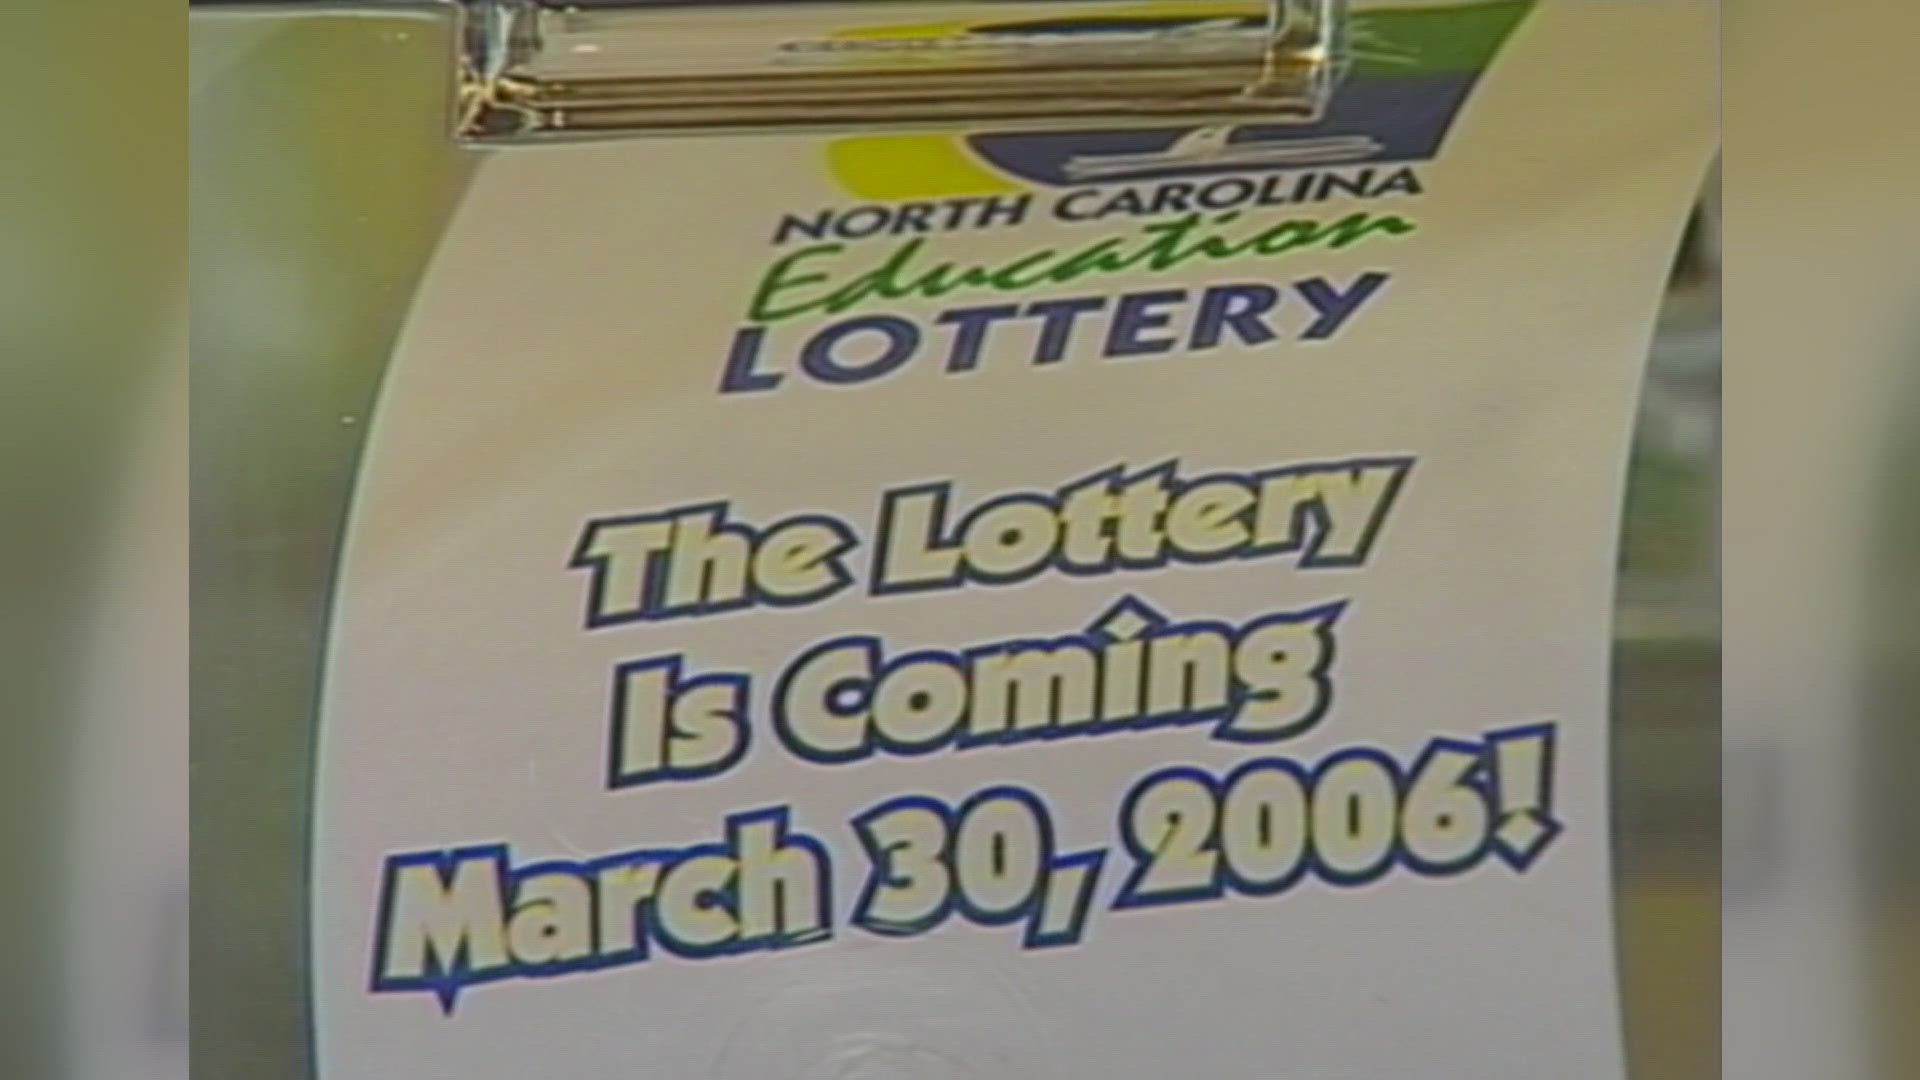 On March 29, 2006, people were preparing for the launch of the NC Education Lottery.